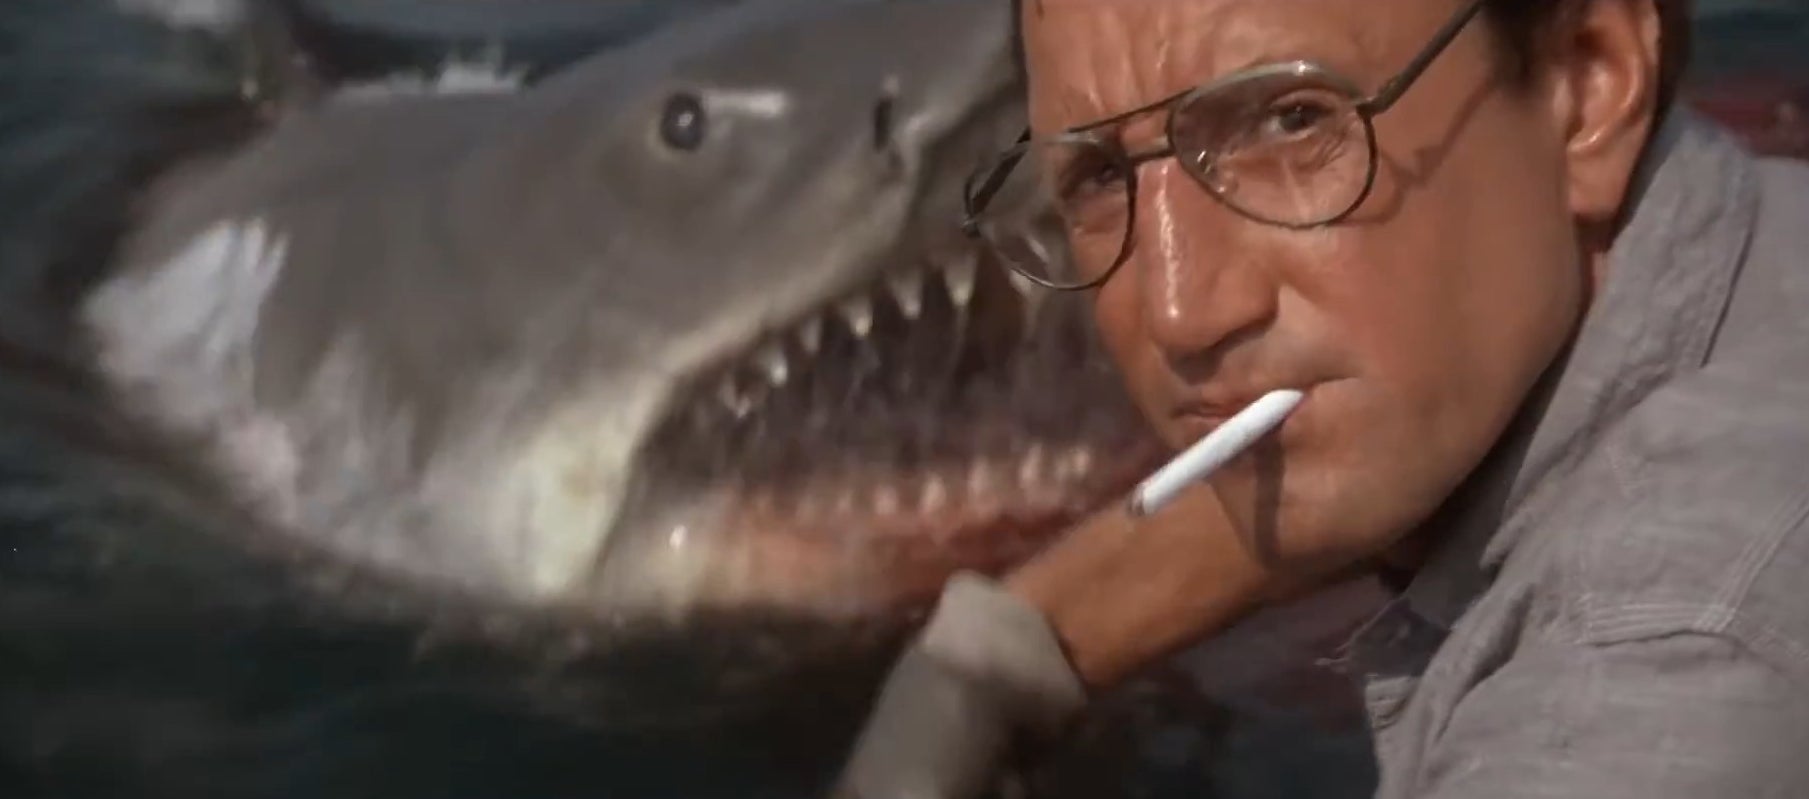 Brody smoking a cigarette with the shark behind him in &quot;Jaws&quot;